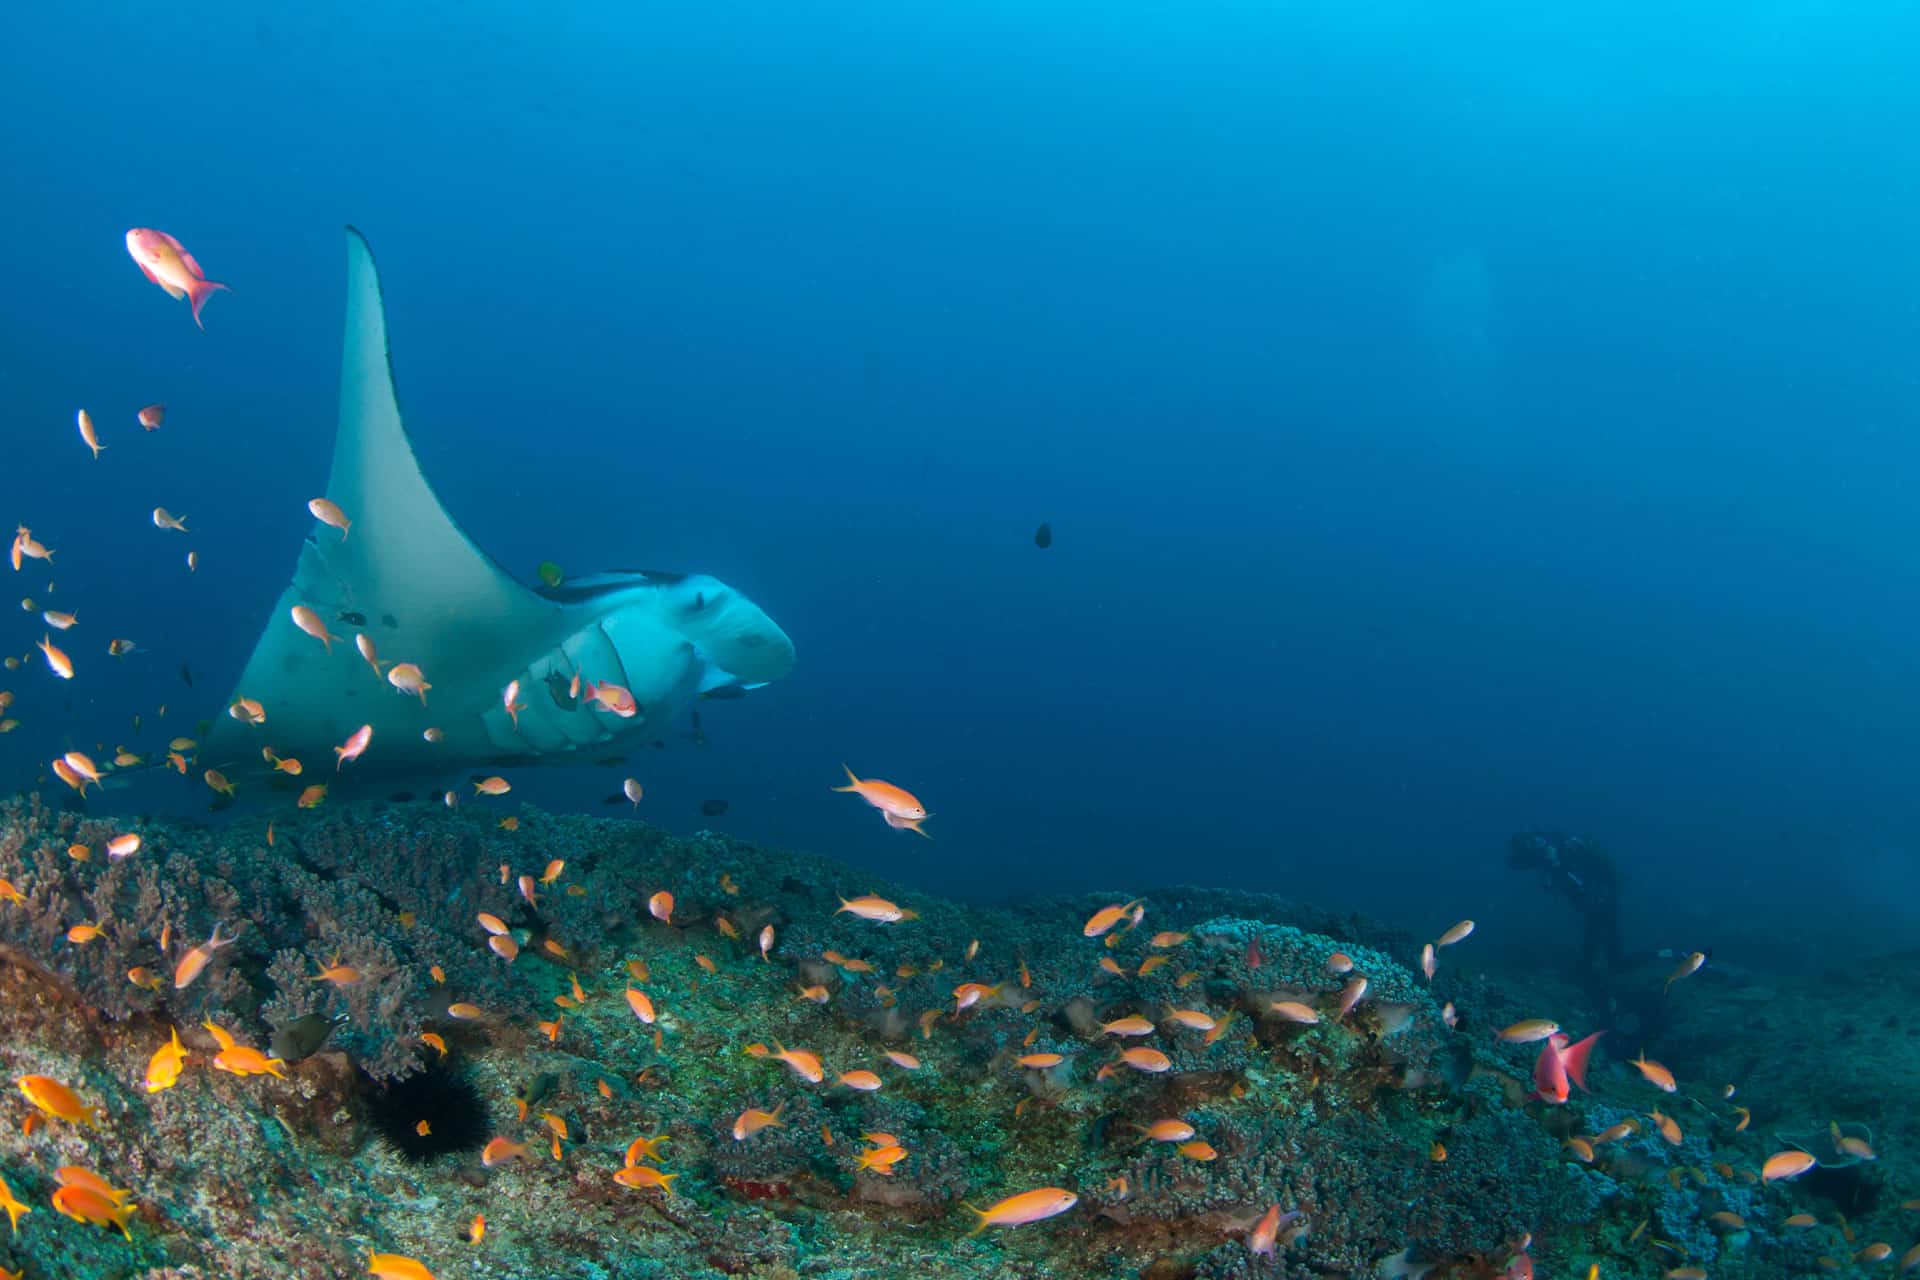 A manta ray swimming in the protected Bazaruto archipelago off Mozambique.